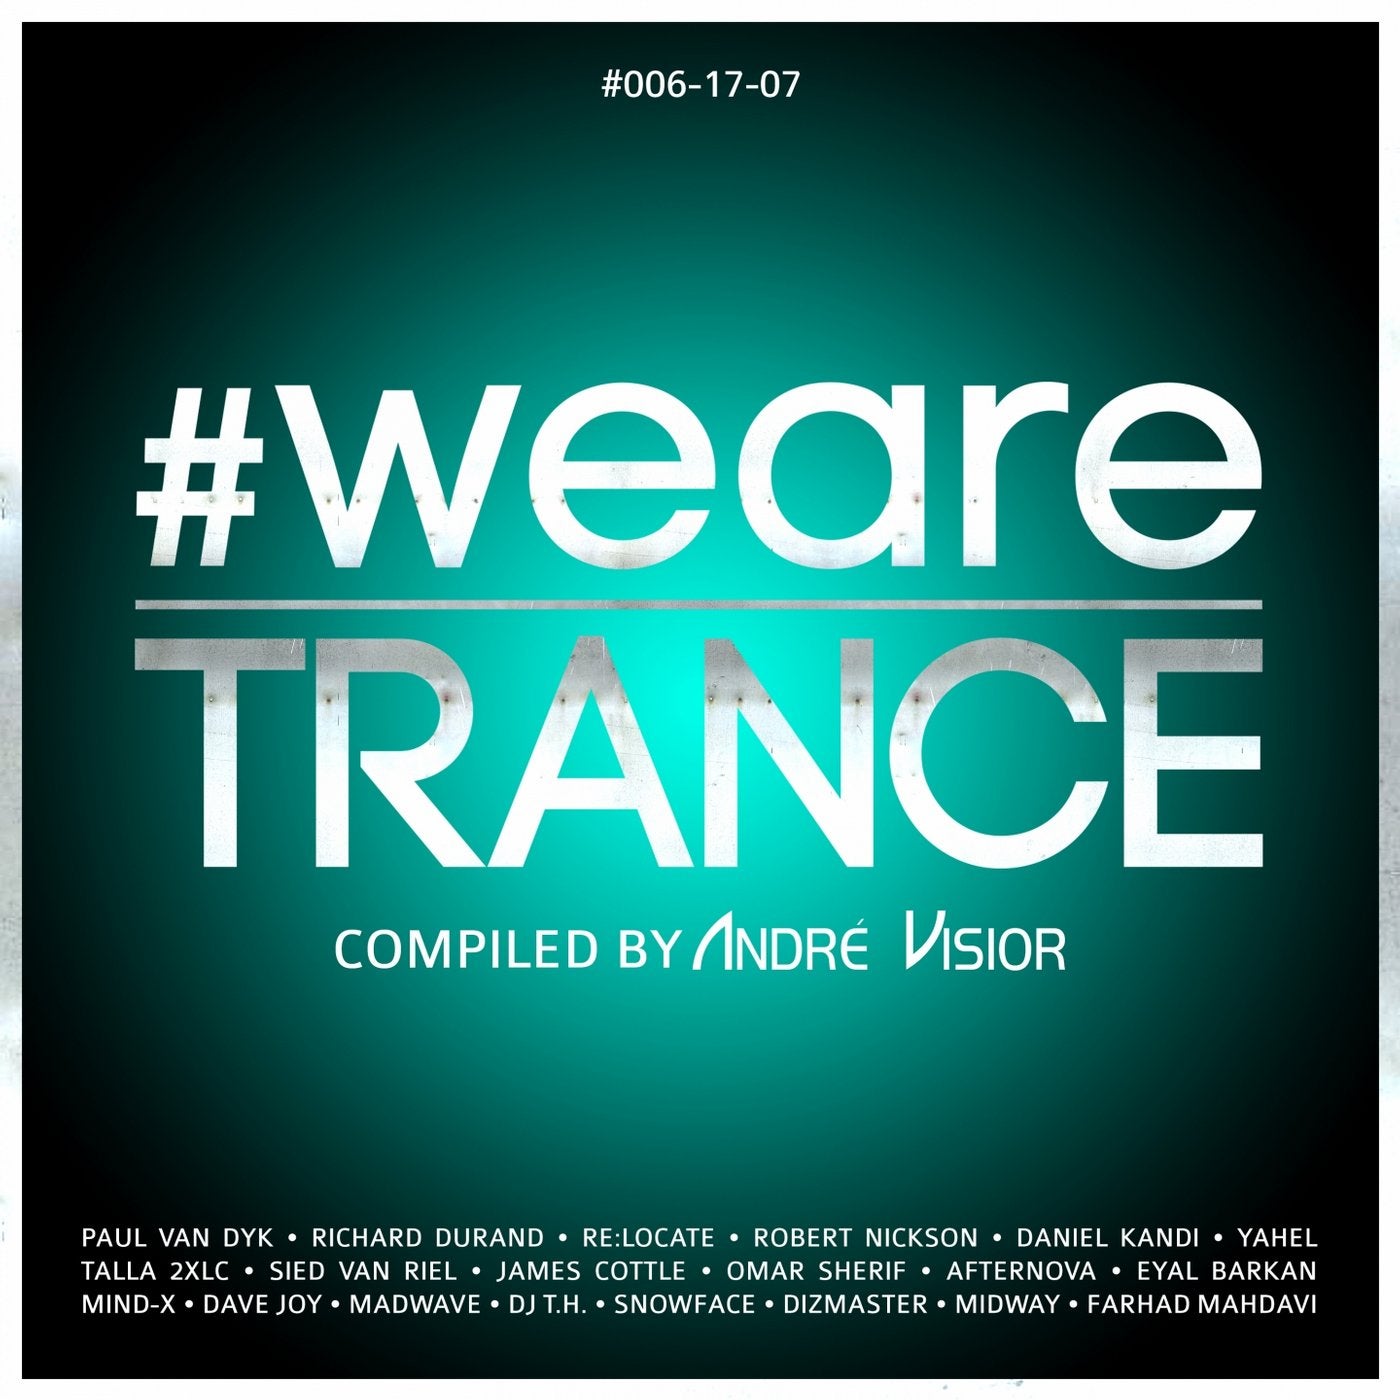 #WeAreTrance #006-17-07 (Compiled by Andre Visior)